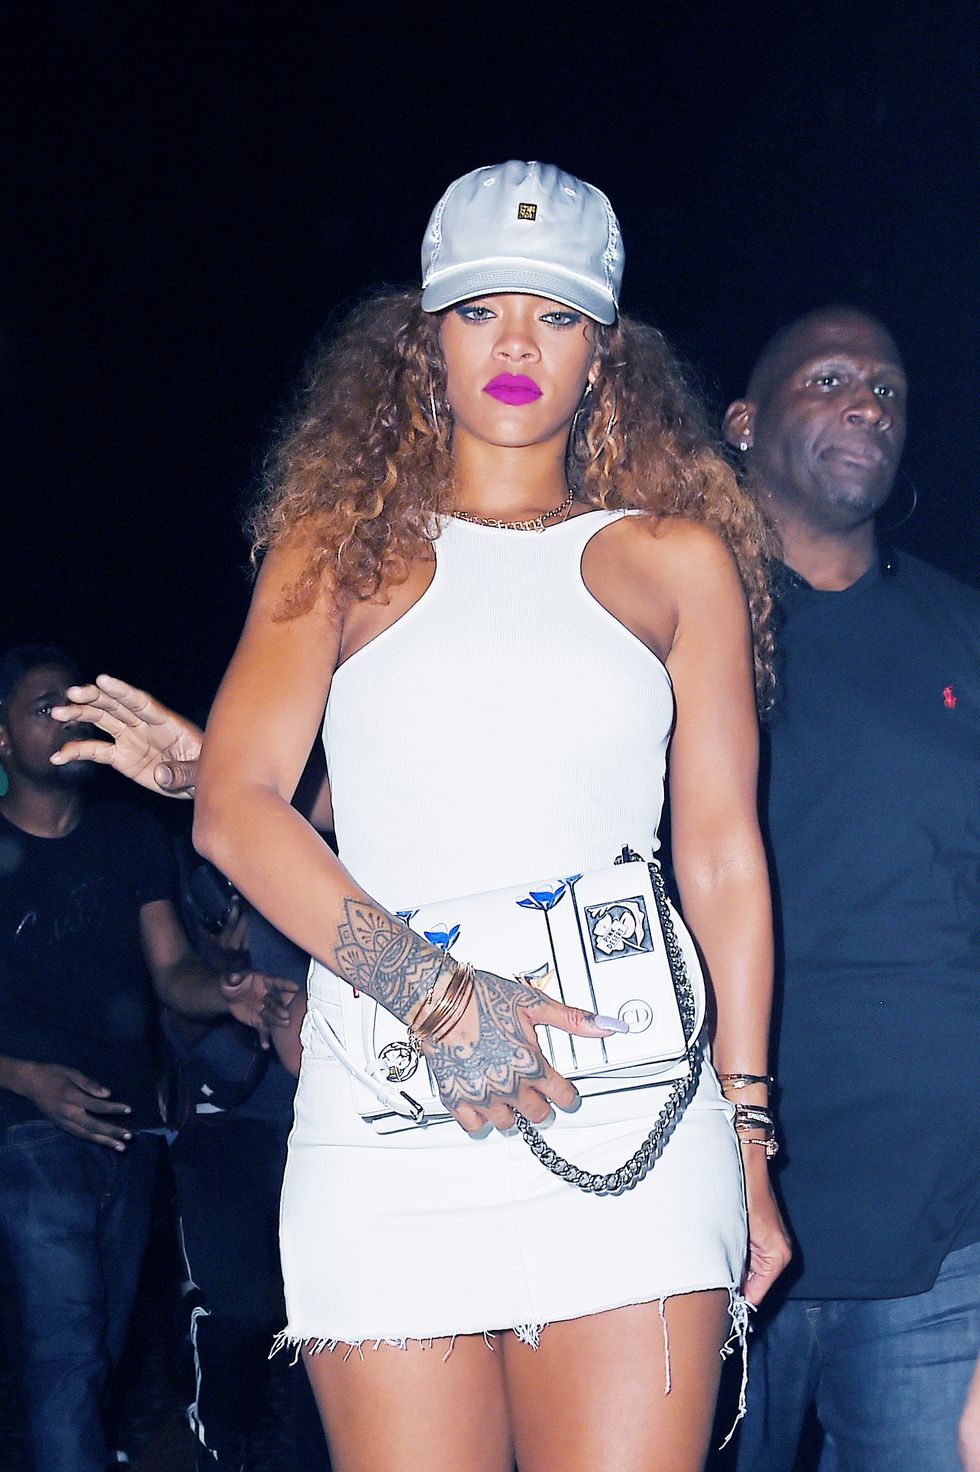 Rihanna wears bright pink lipstick with a white dress and baseball cap to hit the club with Lewis Hamilton